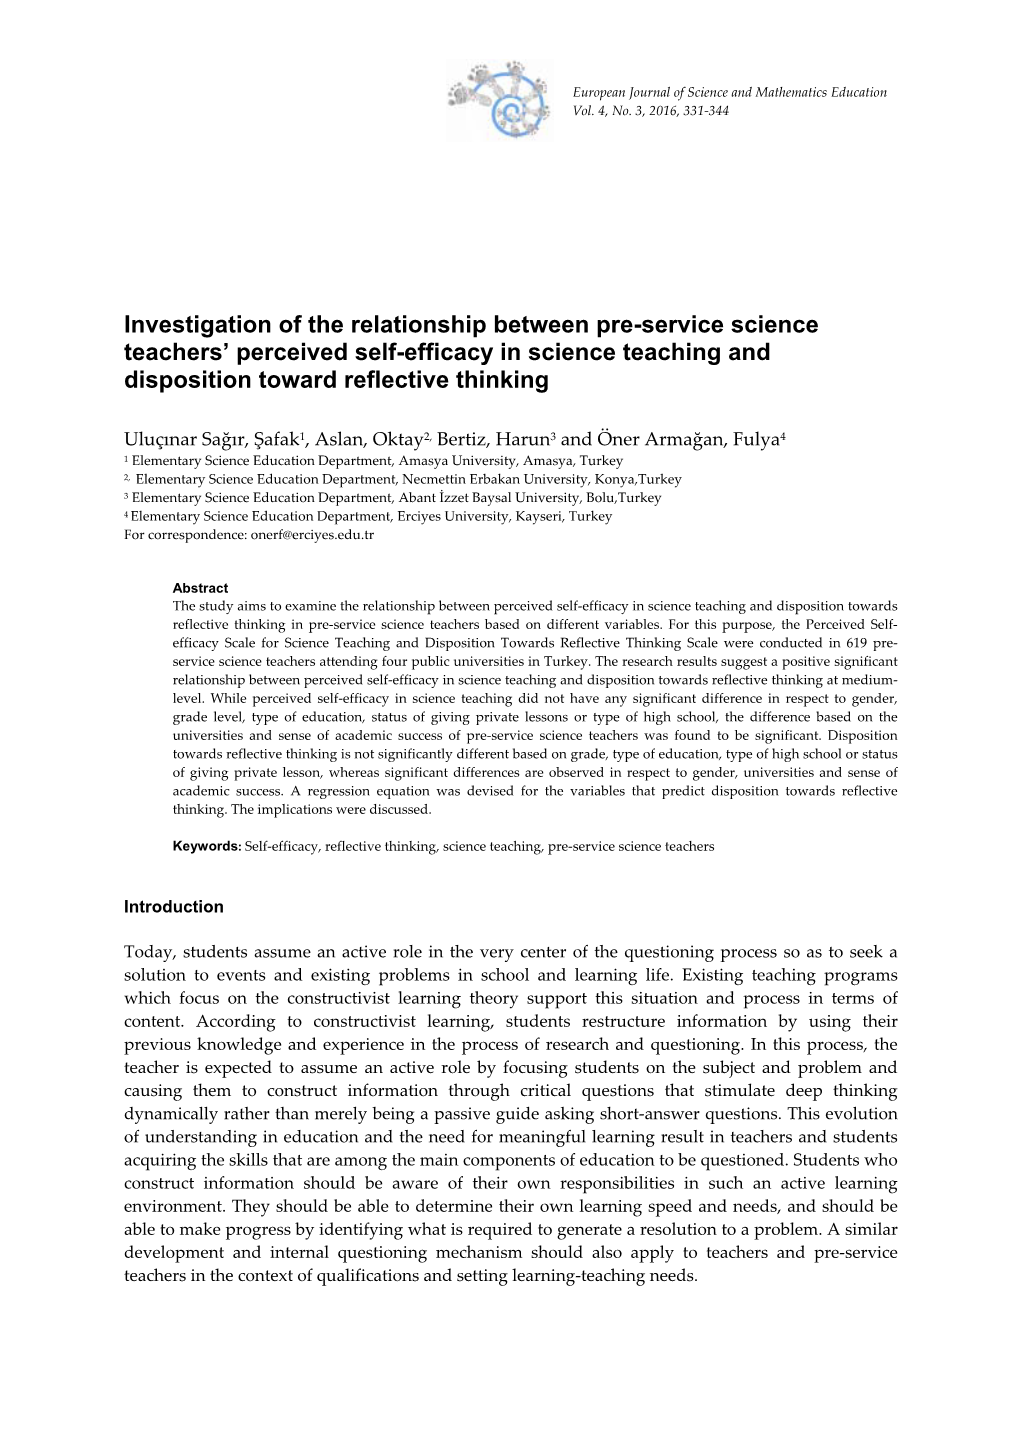 Investigation of the Relationship Between Pre-Service Science Teachers’ Perceived Self-Efficacy in Science Teaching and Disposition Toward Reflective Thinking